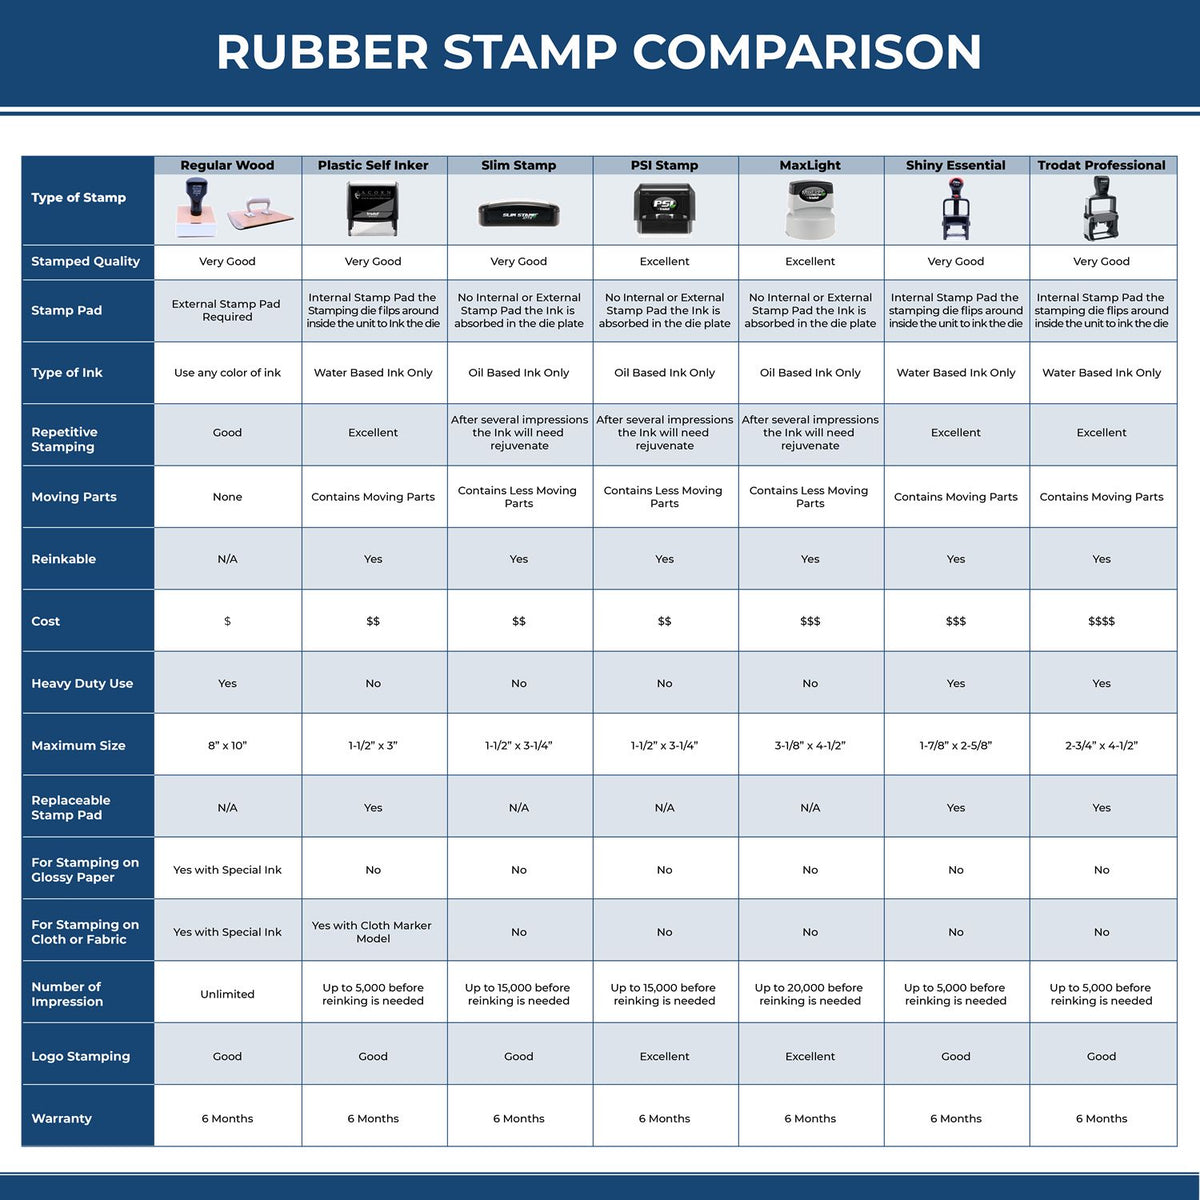 A comparison chart for the different types of mount models available for the Heavy-Duty Vermont Rectangular Notary Stamp.